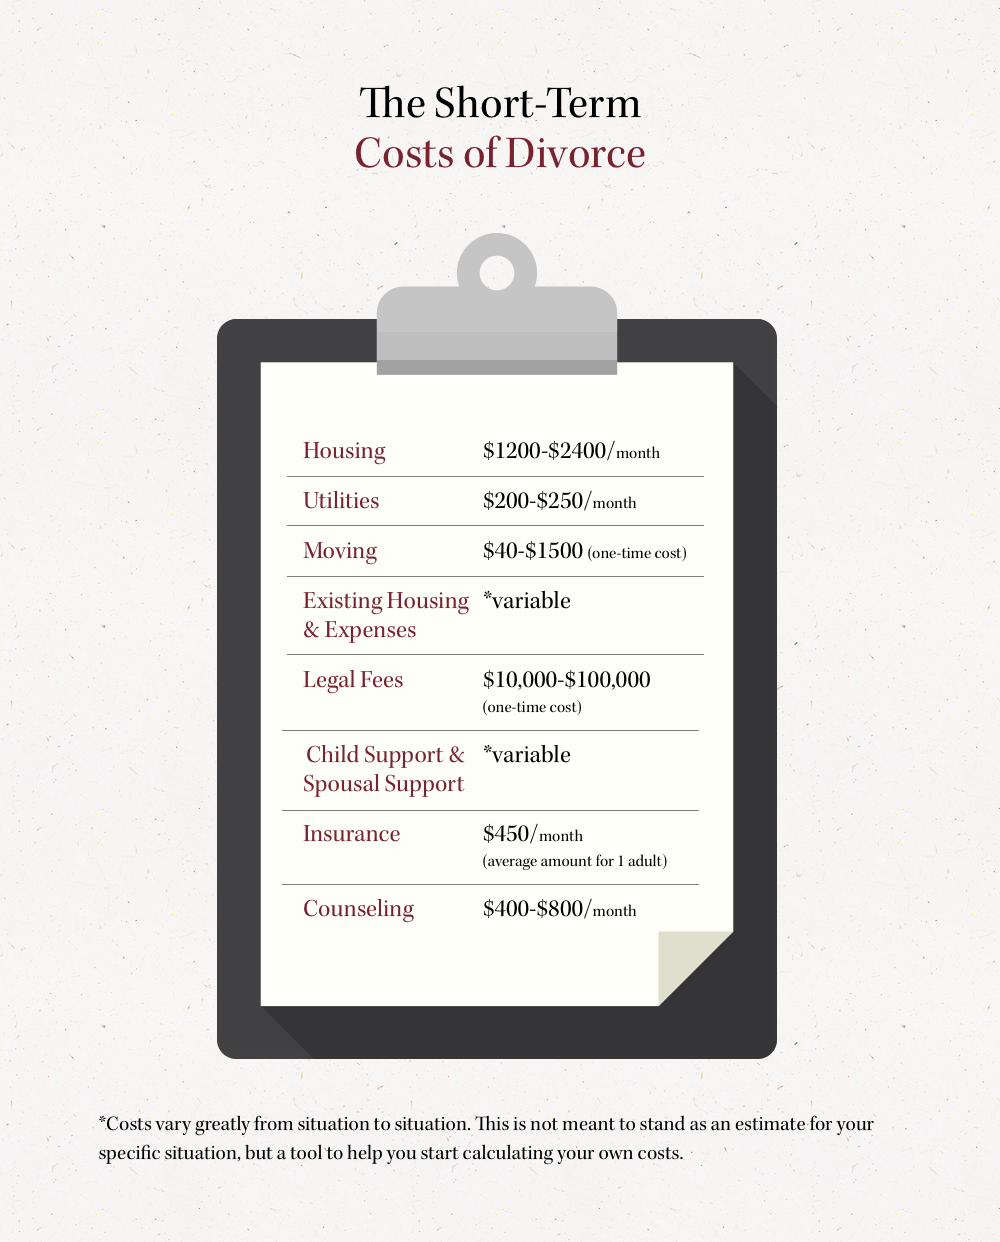 How much does divorce cost?